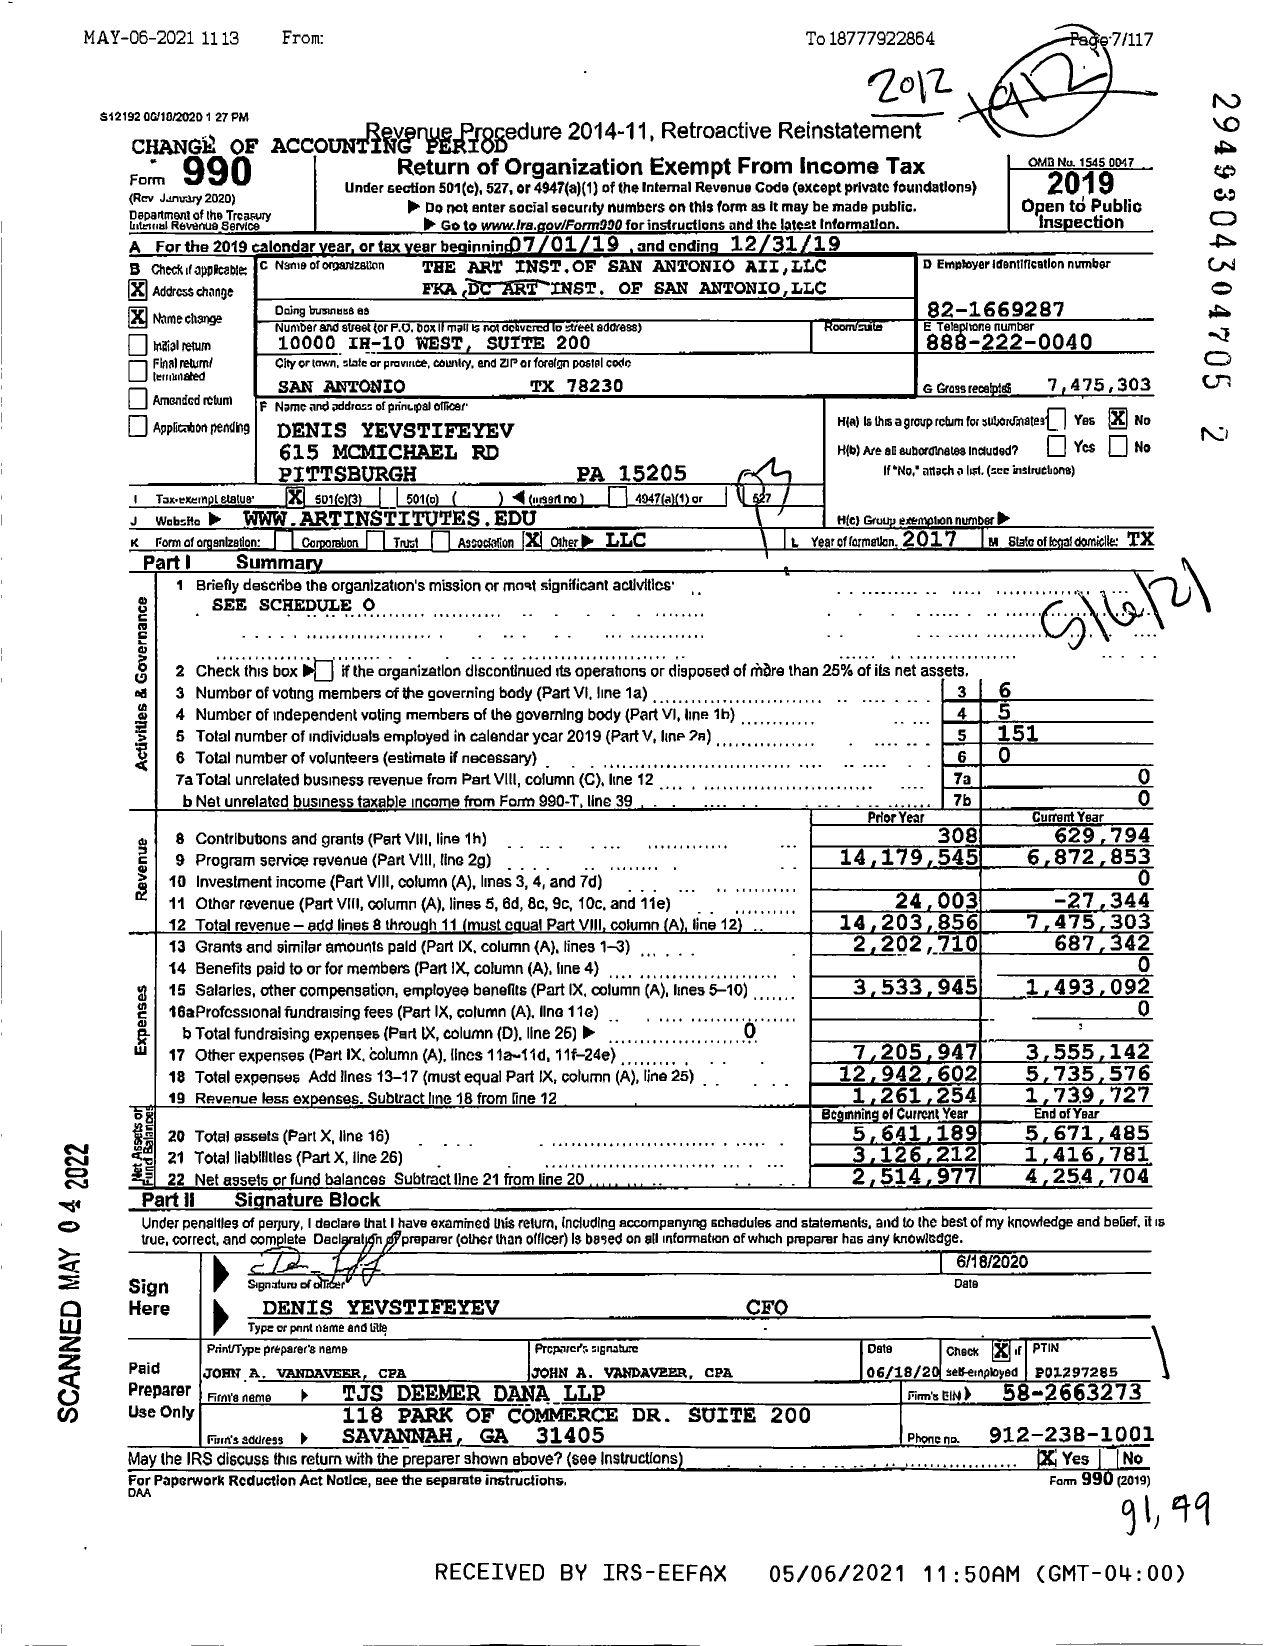 Image of first page of 2020 Form 990 for The Arts Institute of San Antonio